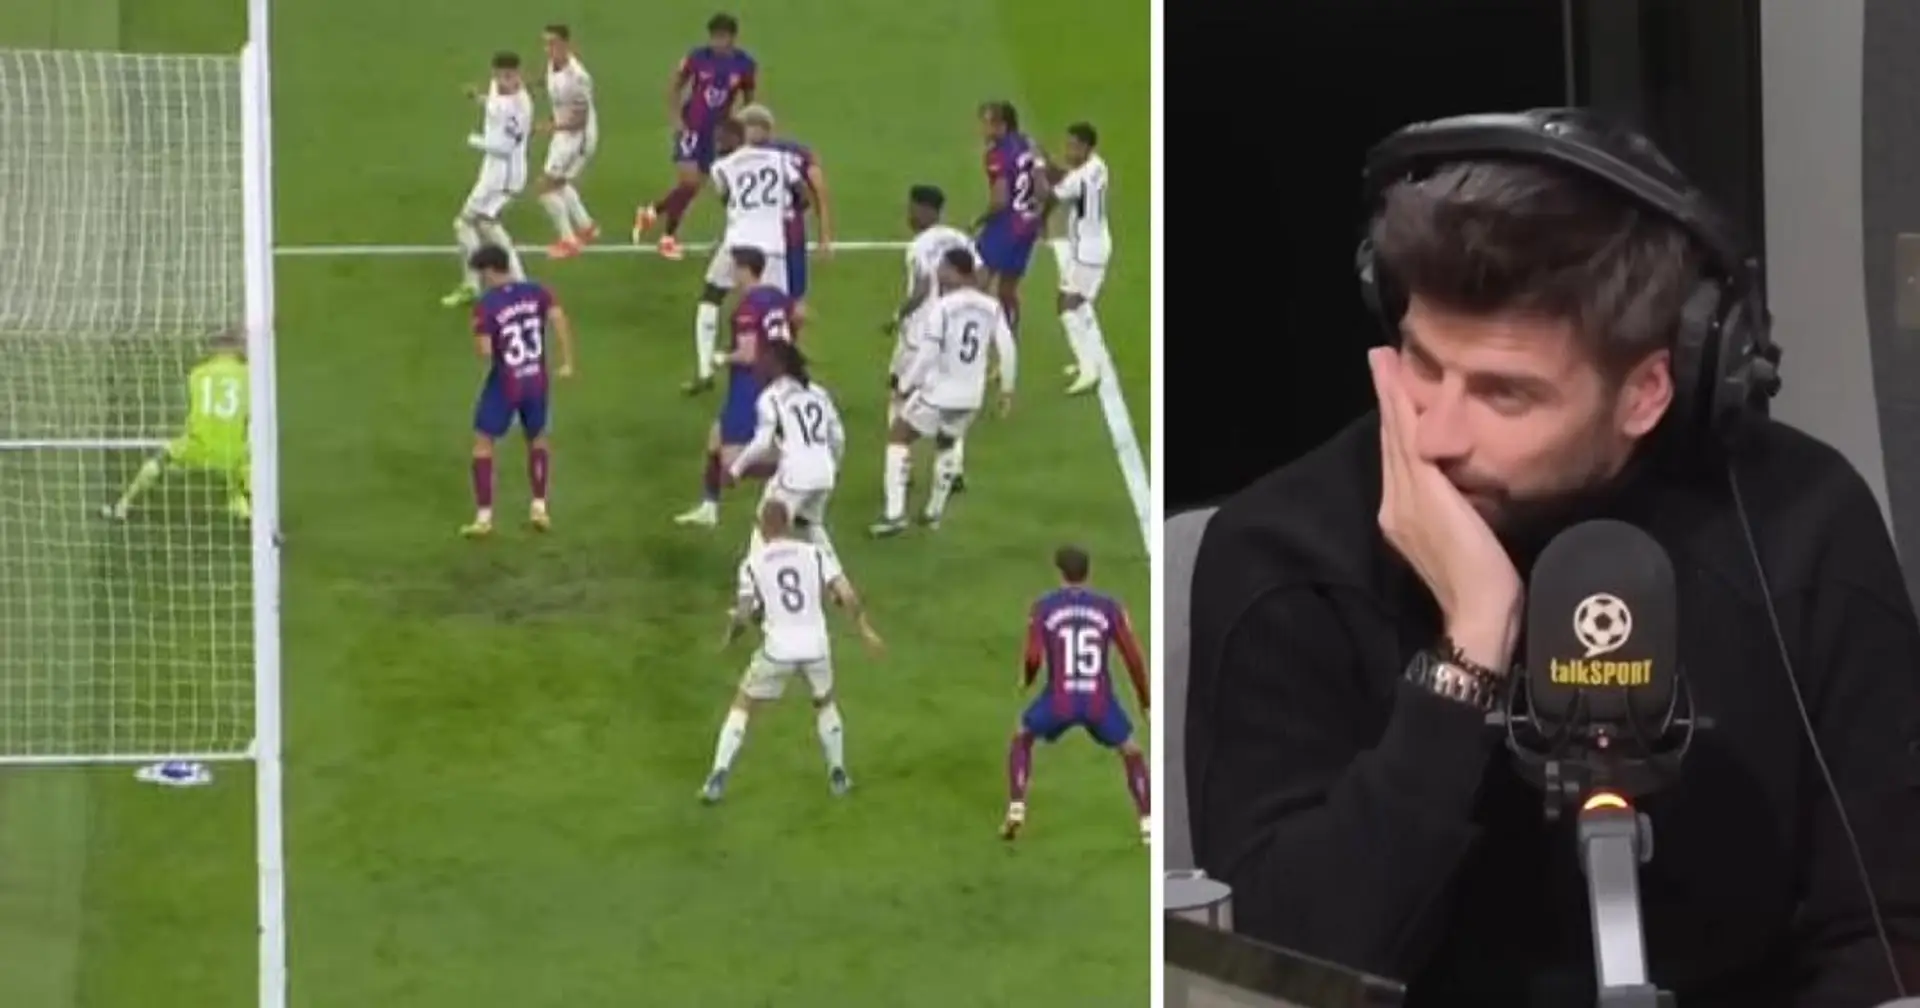 'I feel the ball went in': Gerard Pique talks sense after El Clasico's goal-line controversy